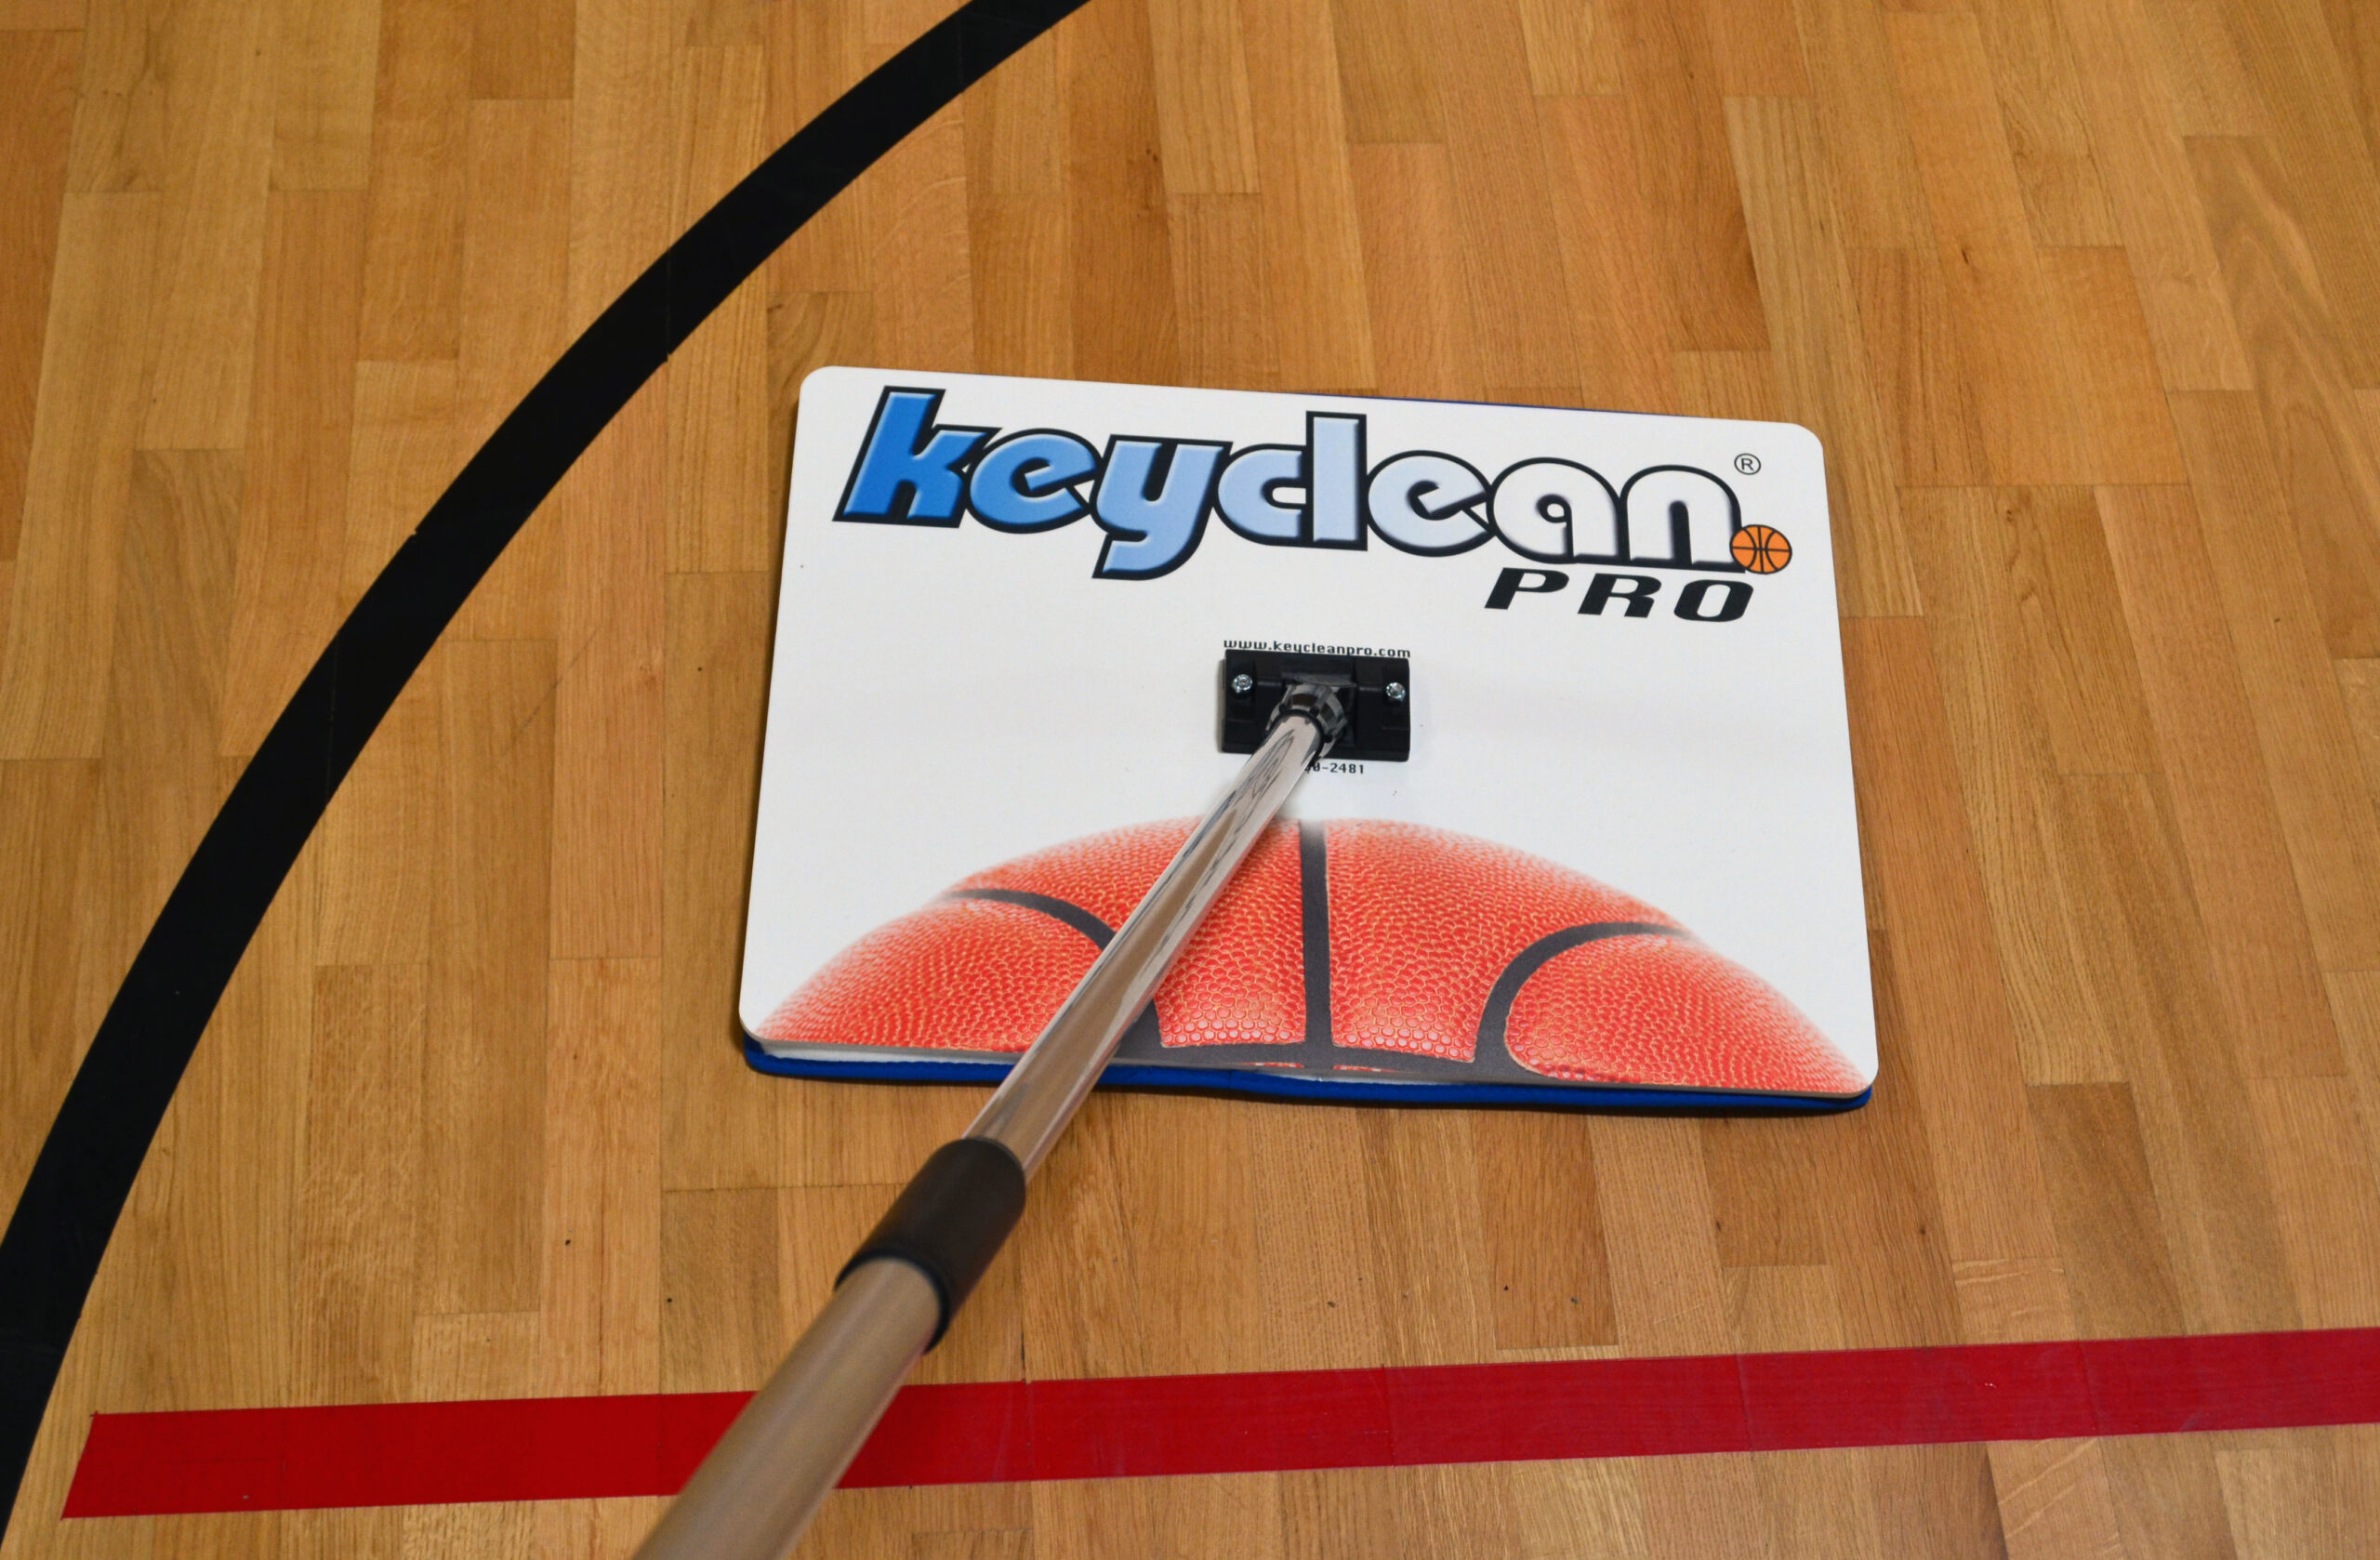 https://kbacoach.com/wp-content/uploads/2016/03/products-KeyClean_Pro_gym-floor-mop-cleaner_ox65-6d-scaled.jpg